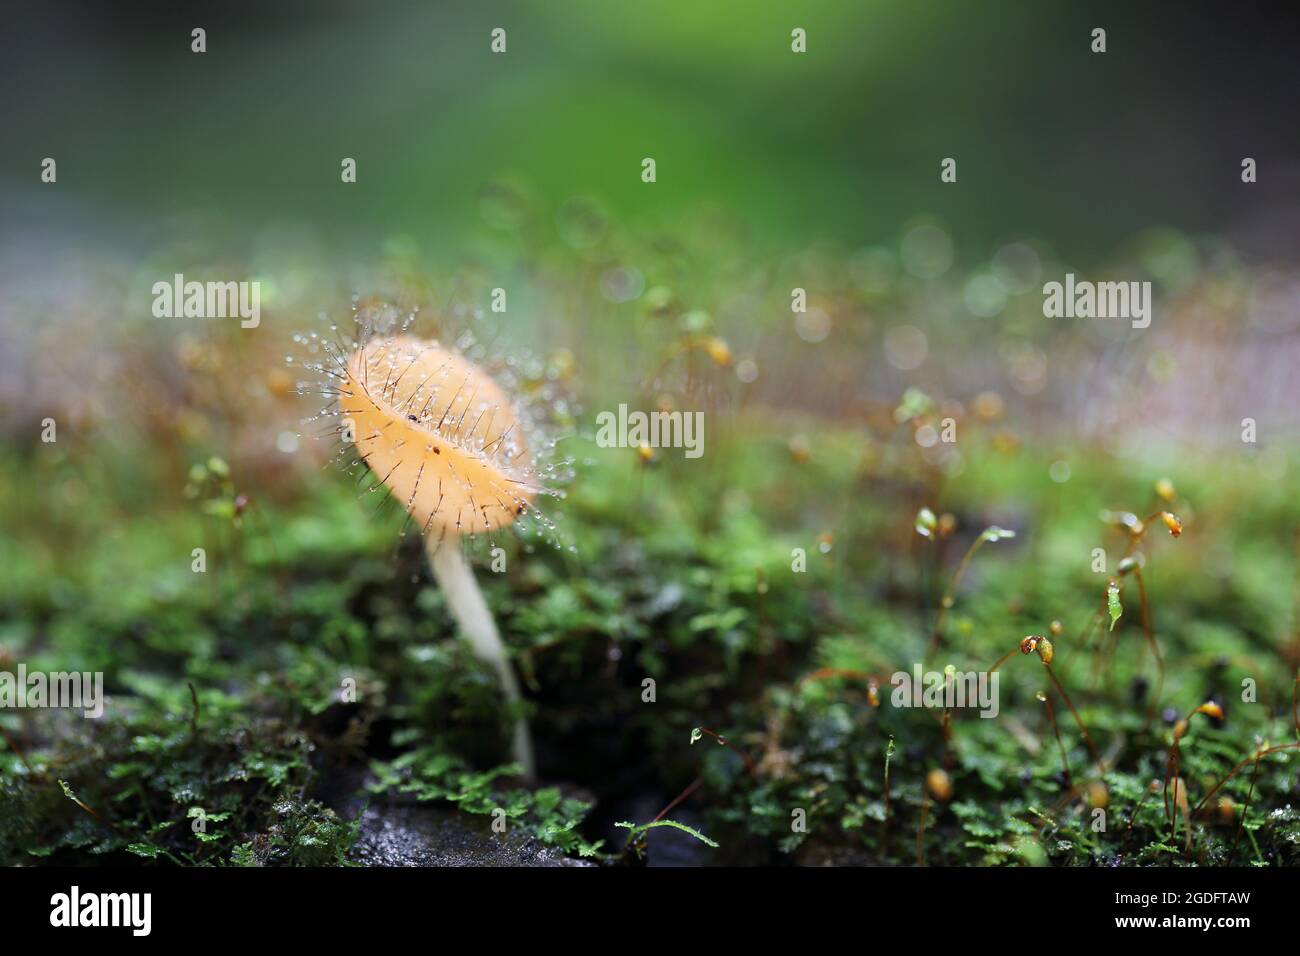 Cookeina sulcipes Fungi cup in close up Stock Photo